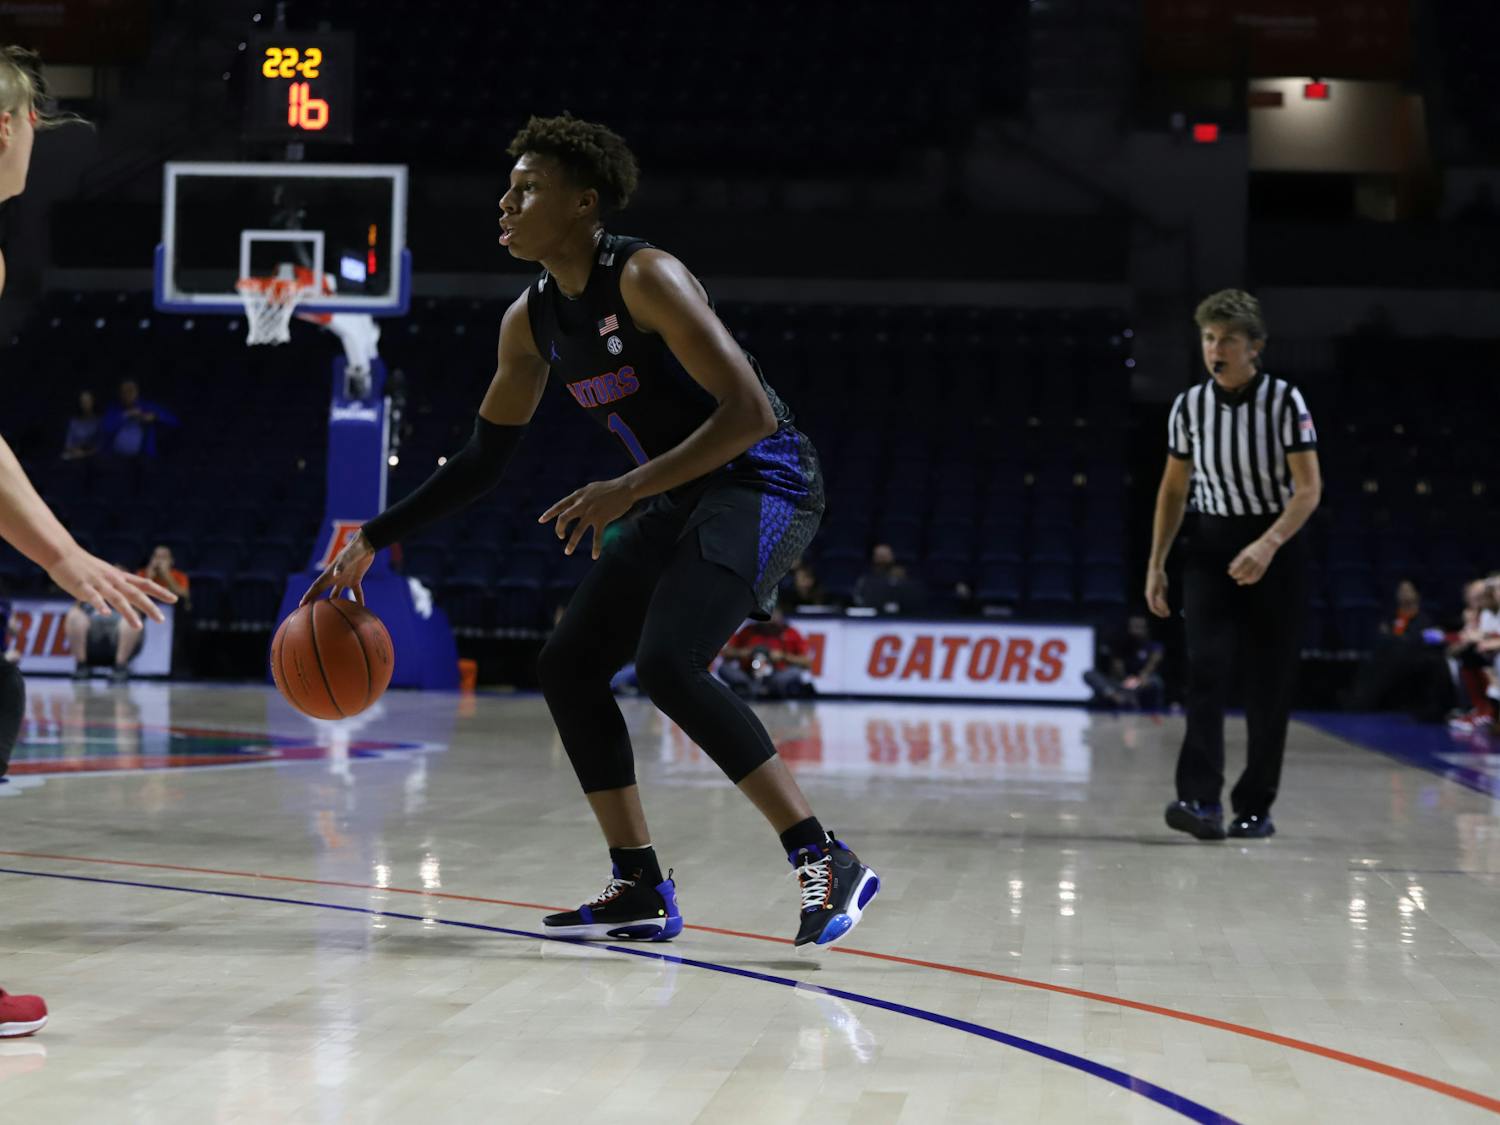 Florida guard Kiara Smith entered the game against UNF as UF’s leading scorer, but only managed 11 points. Photo from UF-Indiana game in November 2019.